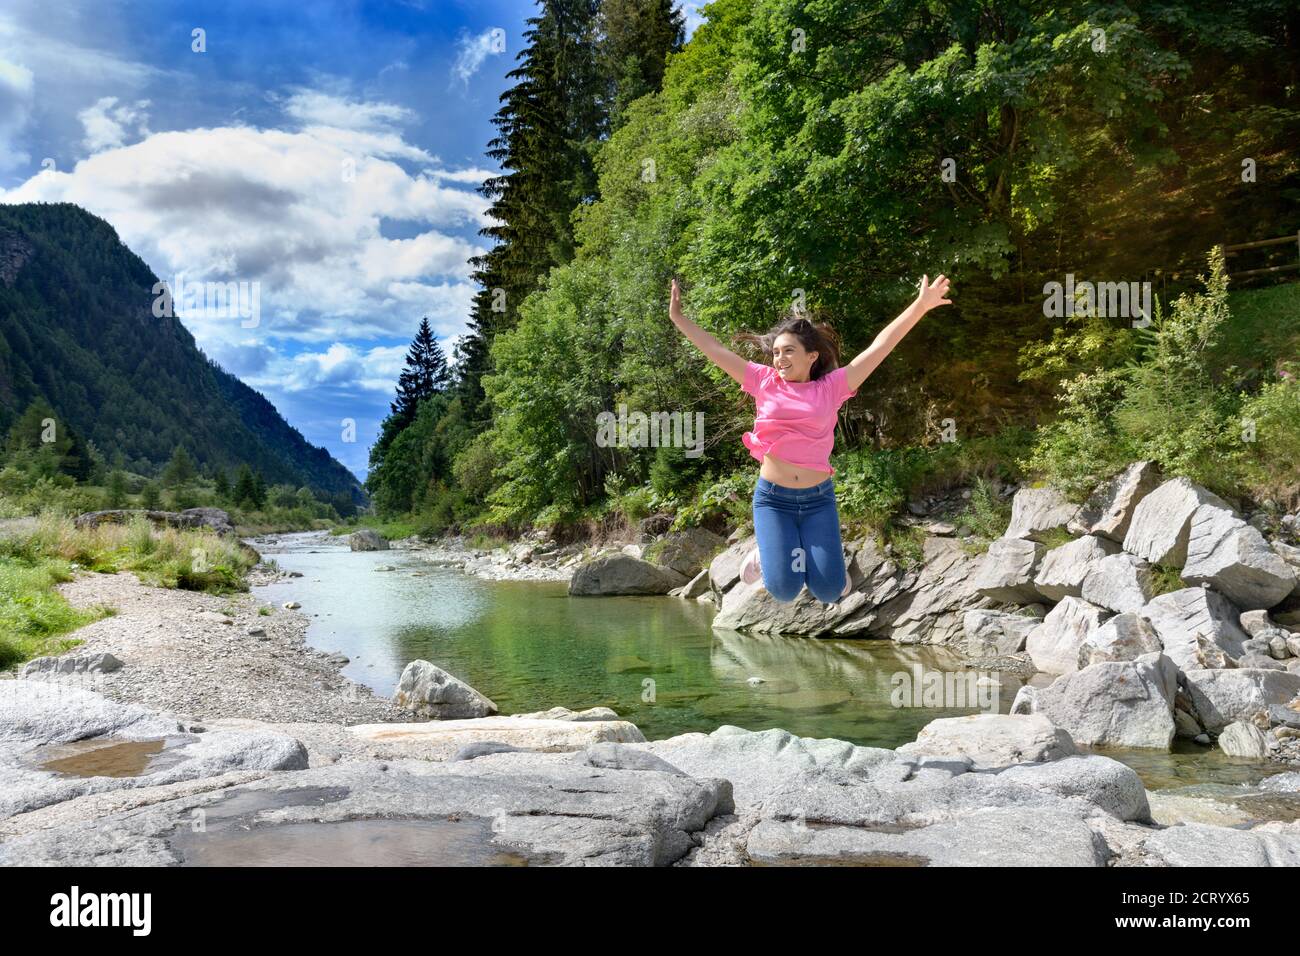 Energetic young girl celebrating her freedom jumping in the air with outstretched arms on rocks alongside a river in a mountain valley Stock Photo